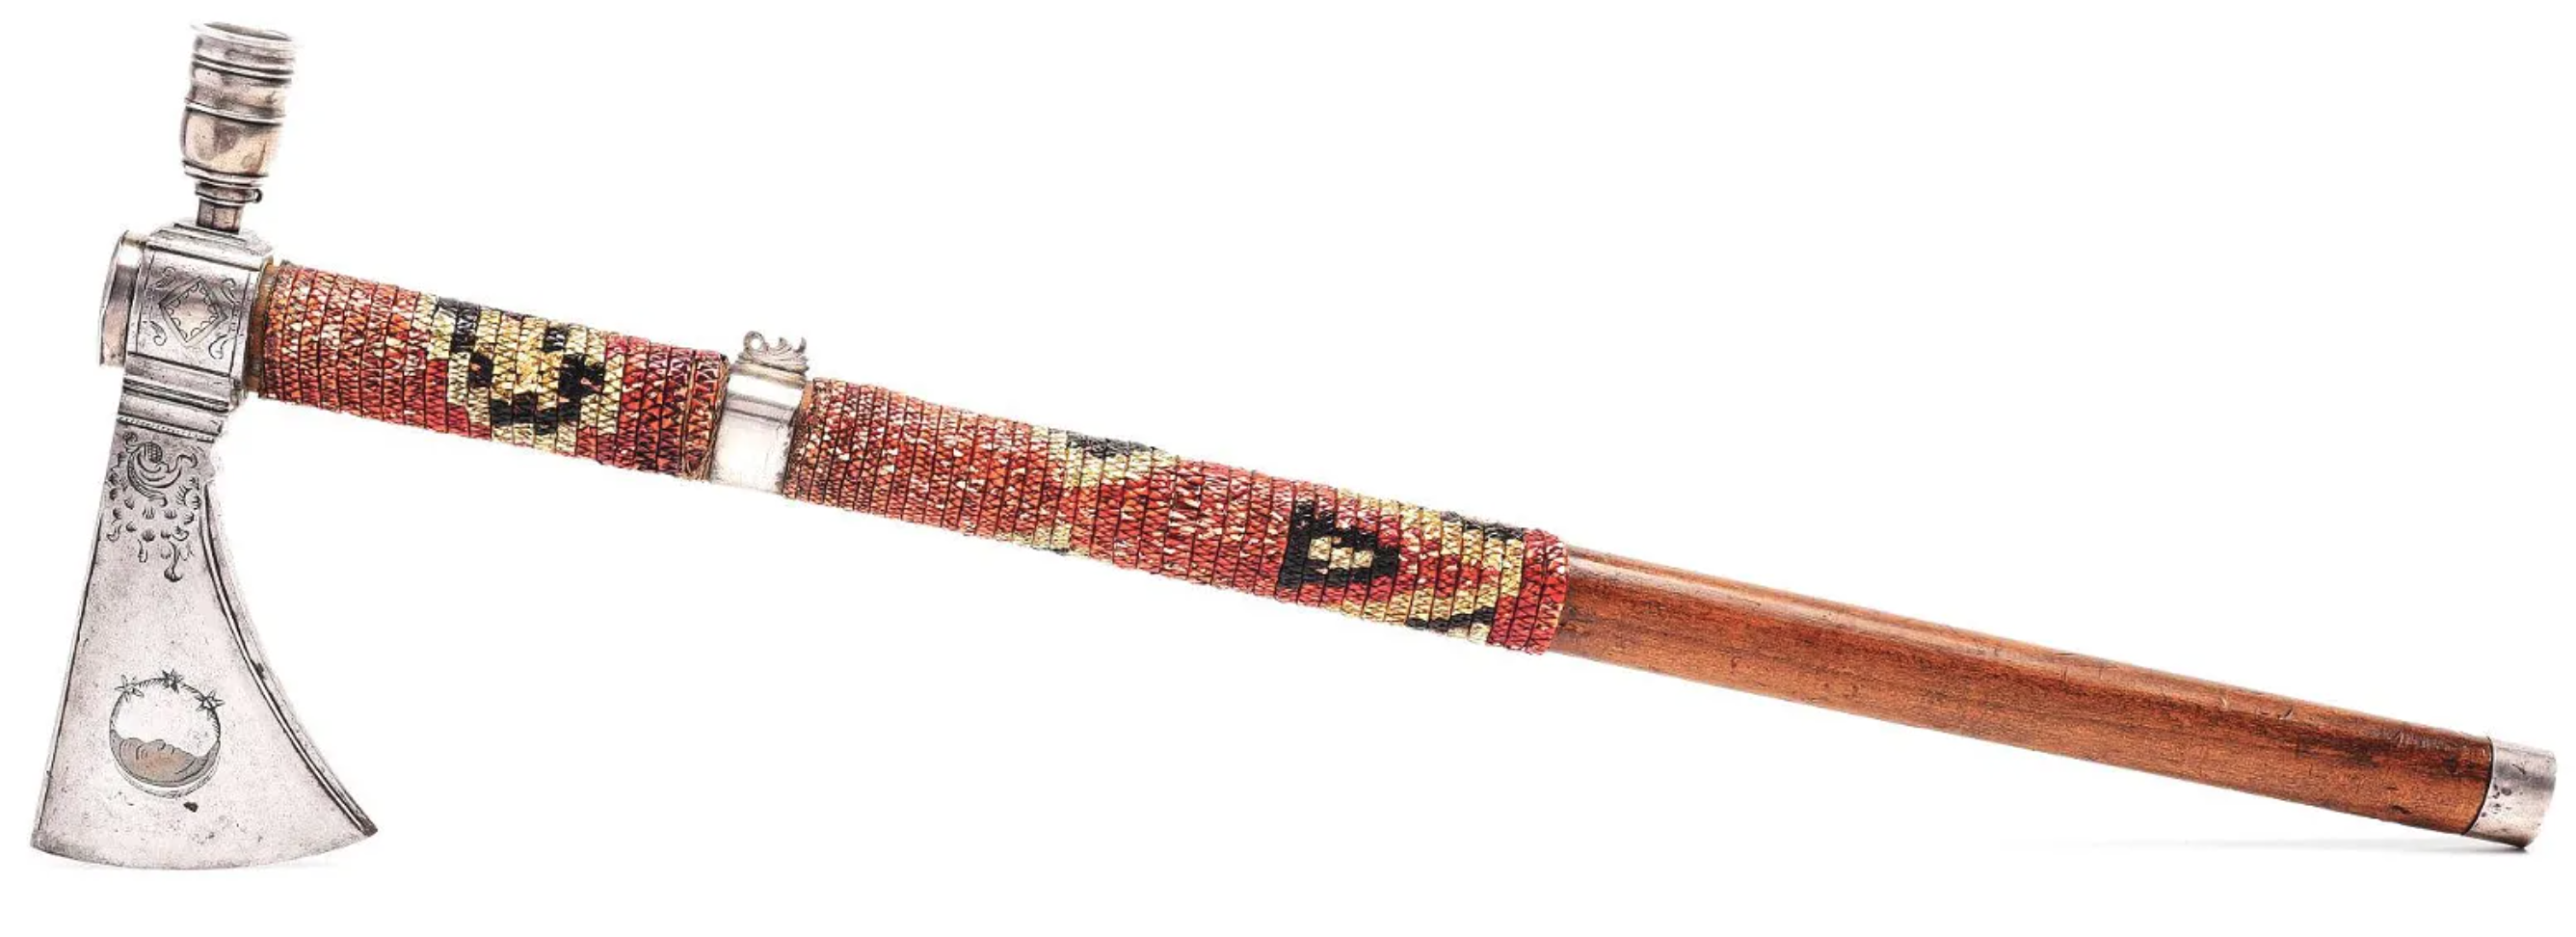 A silver-mounted and inlaid American Revolutionary War tomahawk, taken from a captured combatant and brought back to England as a war trophy, sold for $540,000 plus the buyer’s premium in May 2020. Image courtesy of Dan Morphy Auctions and LiveAuctioneers.